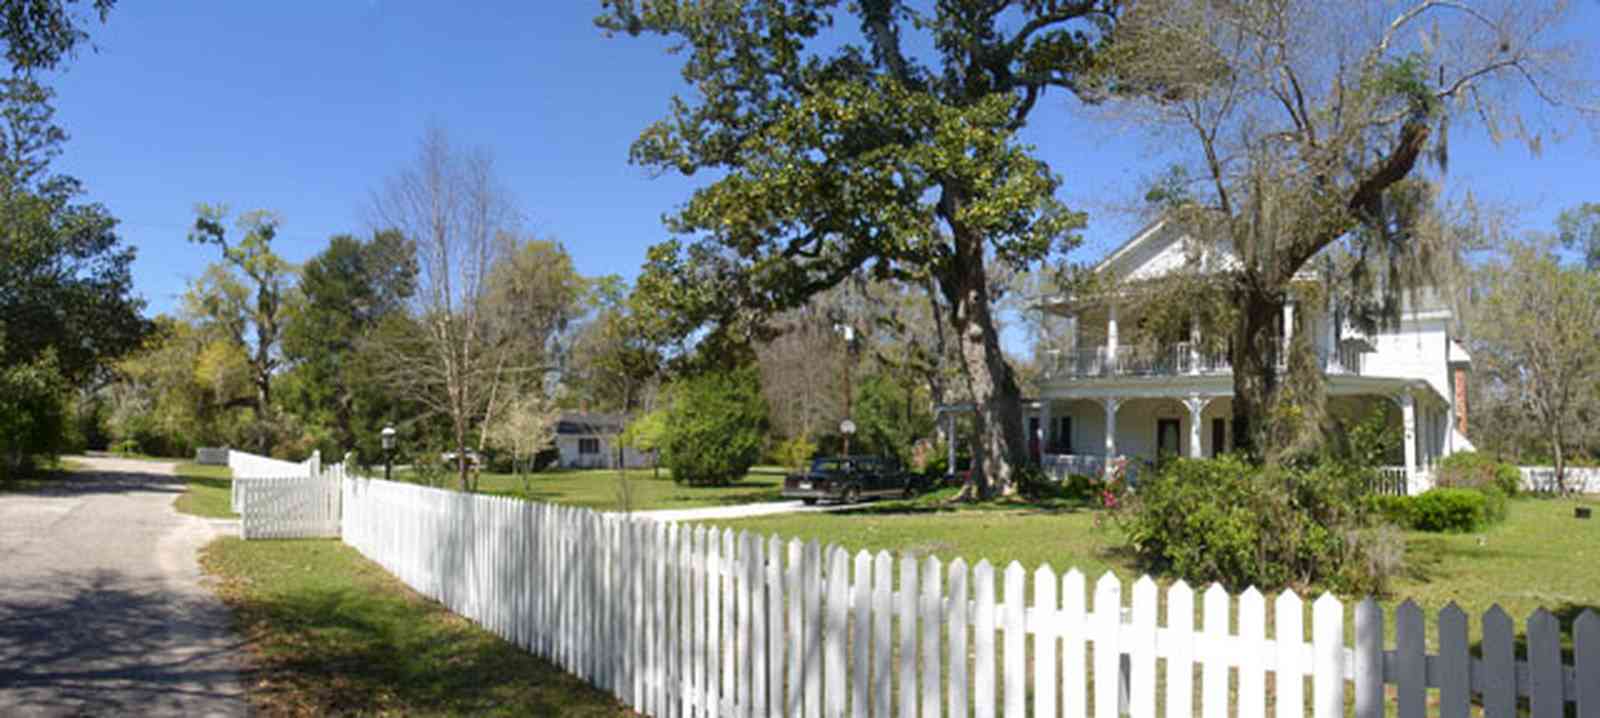 Bagdad:-Creary-Crawford-Walsh-House_02.jpg:  white picket fence, victorian house, magnolia tree